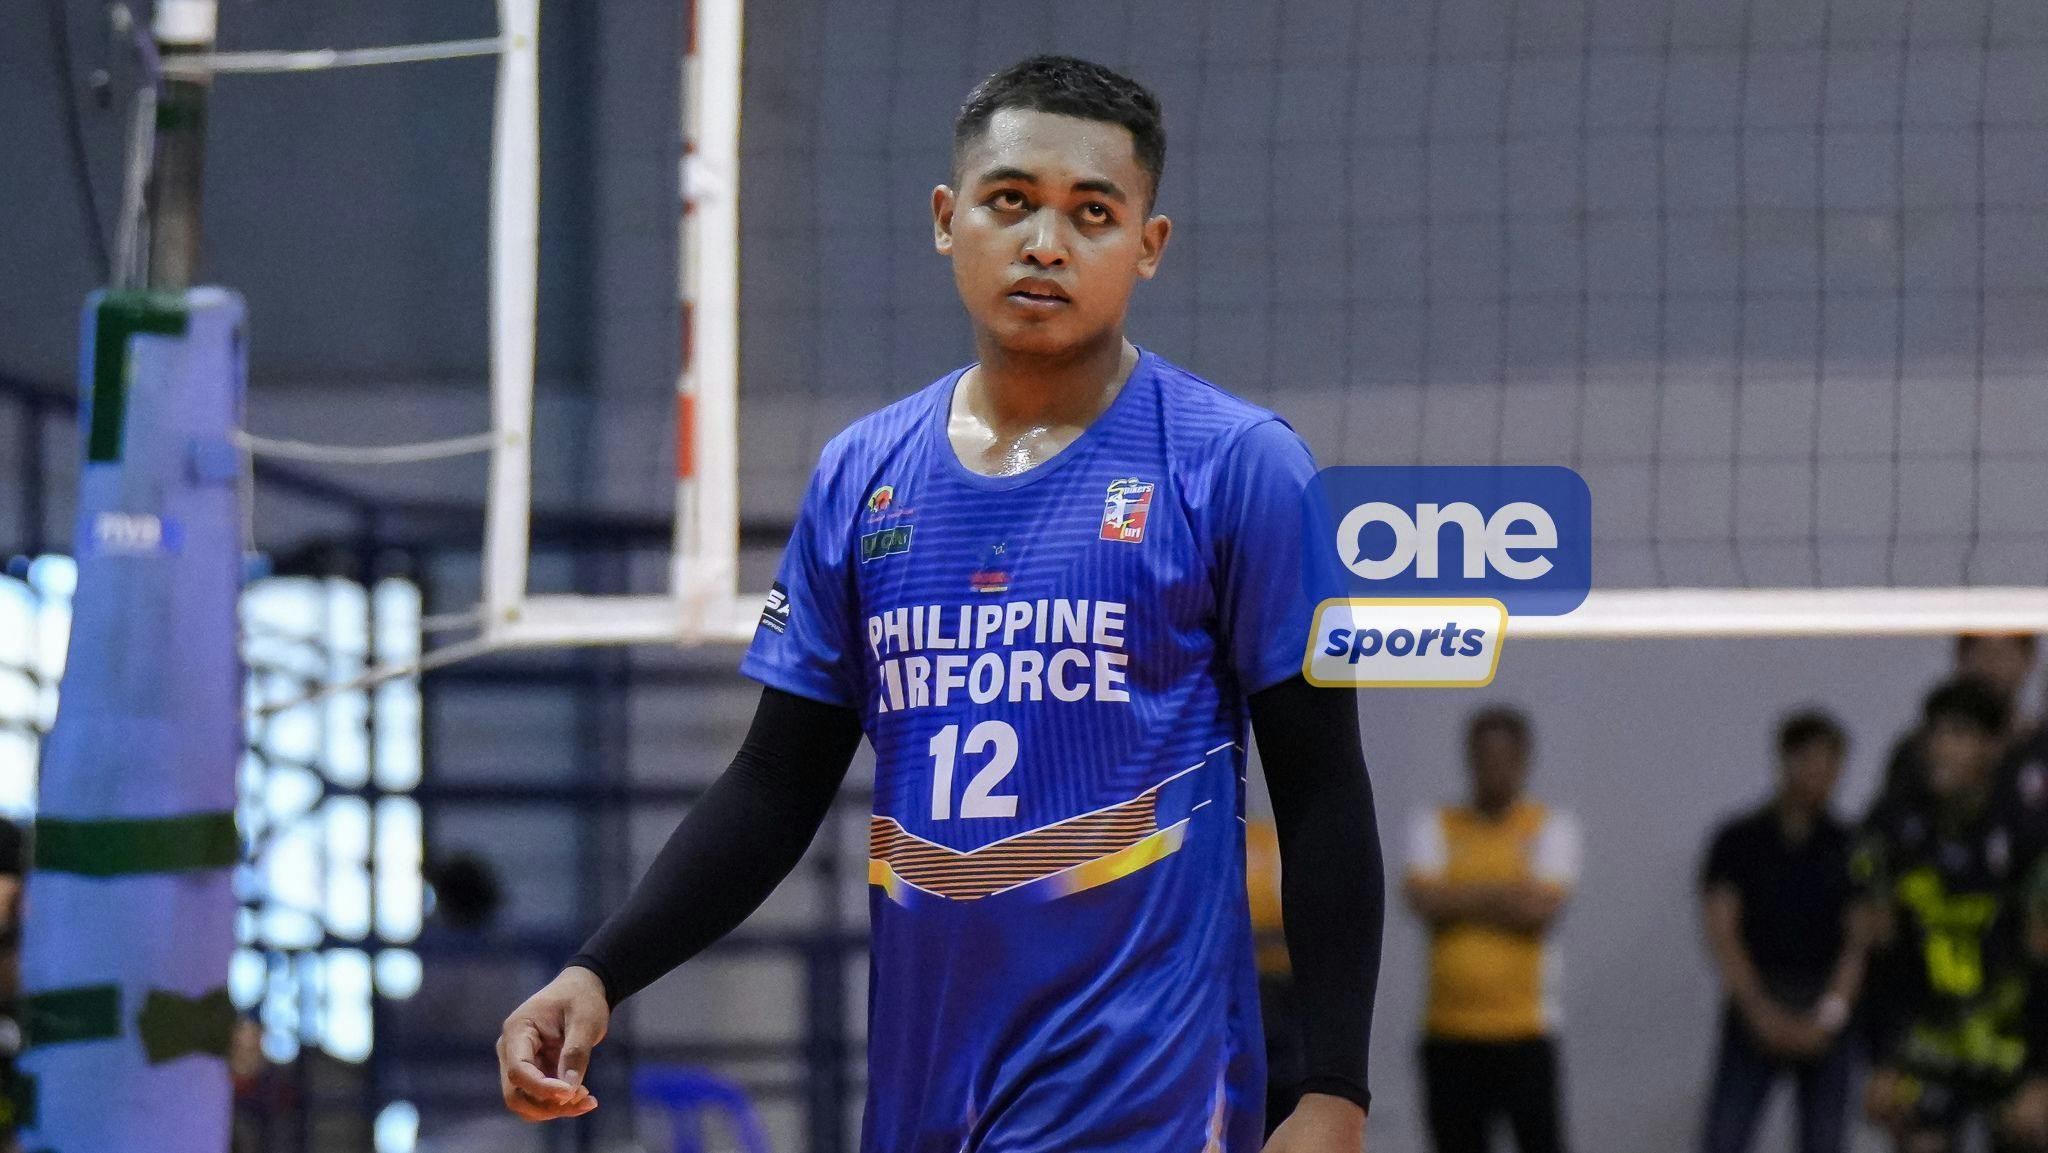 Spikers’ Turf: Bryan James Jaleco, Air Force close campaign with hard-fought win over VNS-Nasty